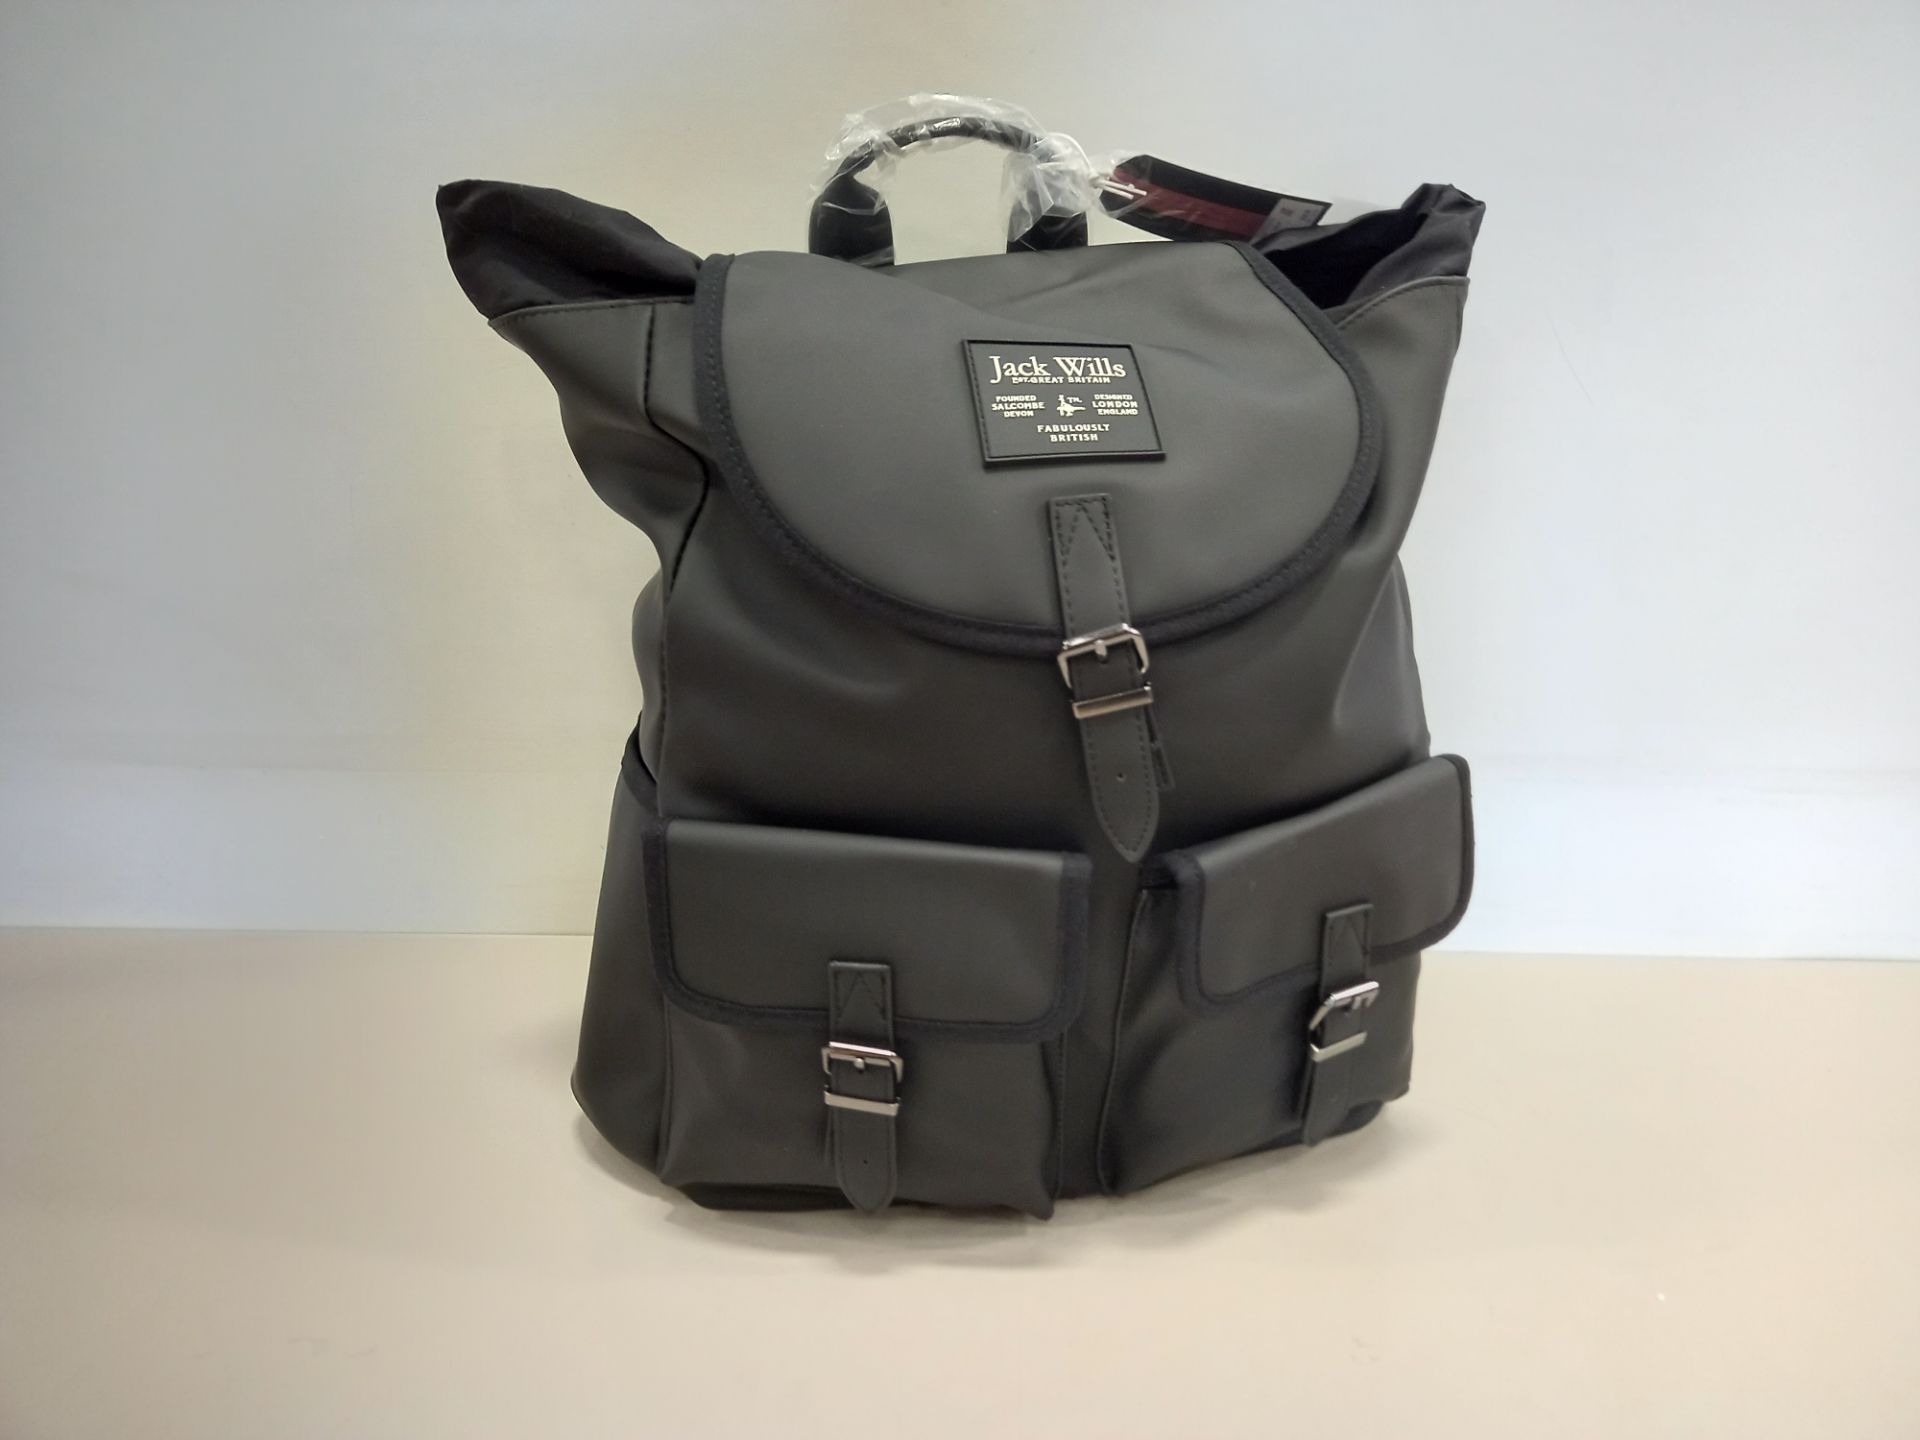 7 X BRAND NEW JACK WILLS BERESFORD CARGO BACKPACKS IN BLACK WITH SWING TICKETS RRP £59.95 EACH TOTAL